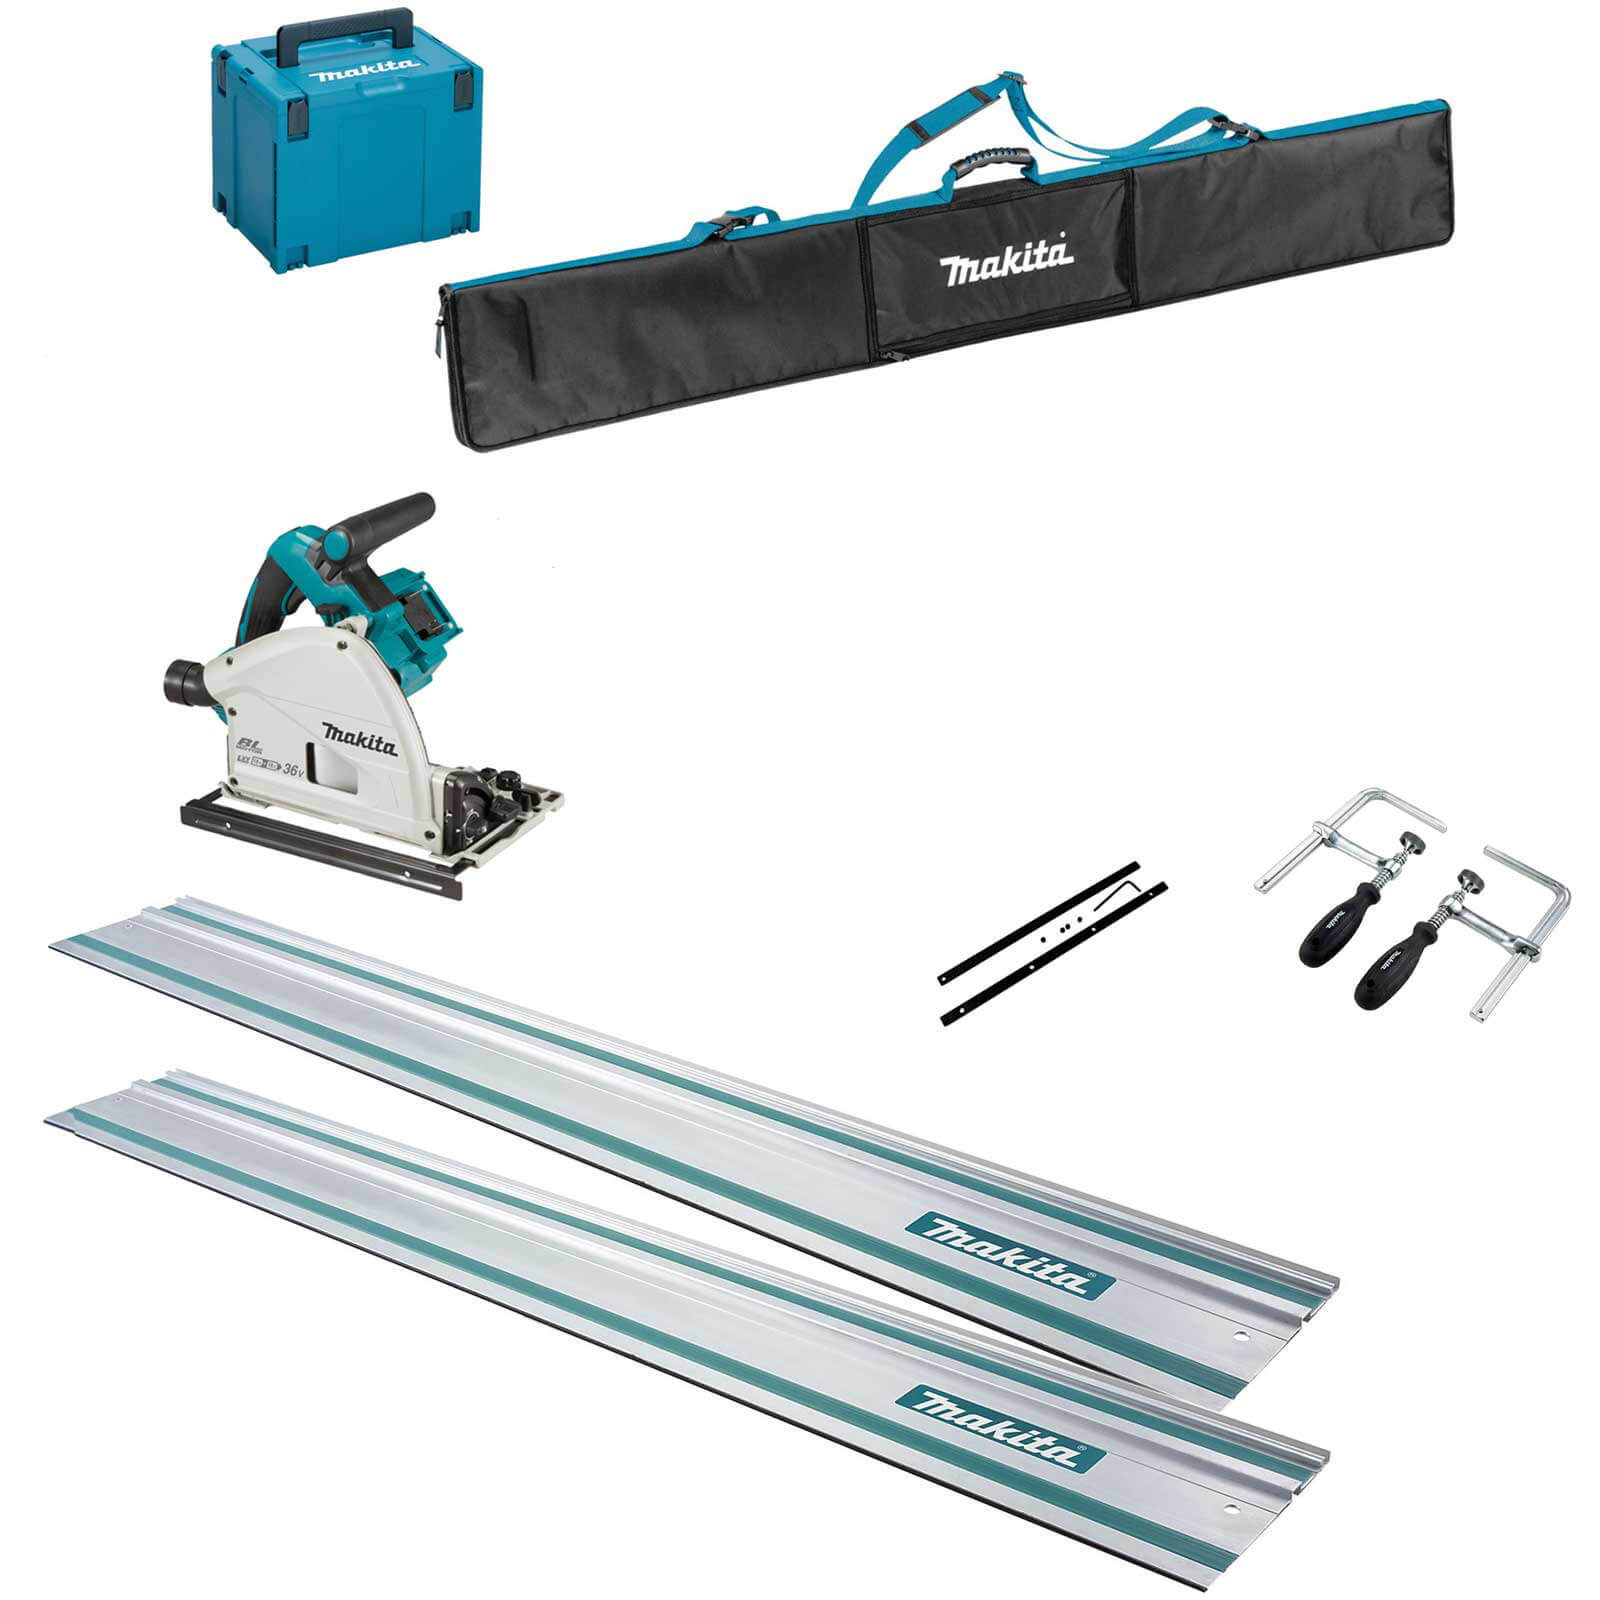 Makita DSP600ZJ Twin 18v LXT Cordless Brushless Plunge Saw 6 Piece Kit No Batteries No Charger Case & Accessories